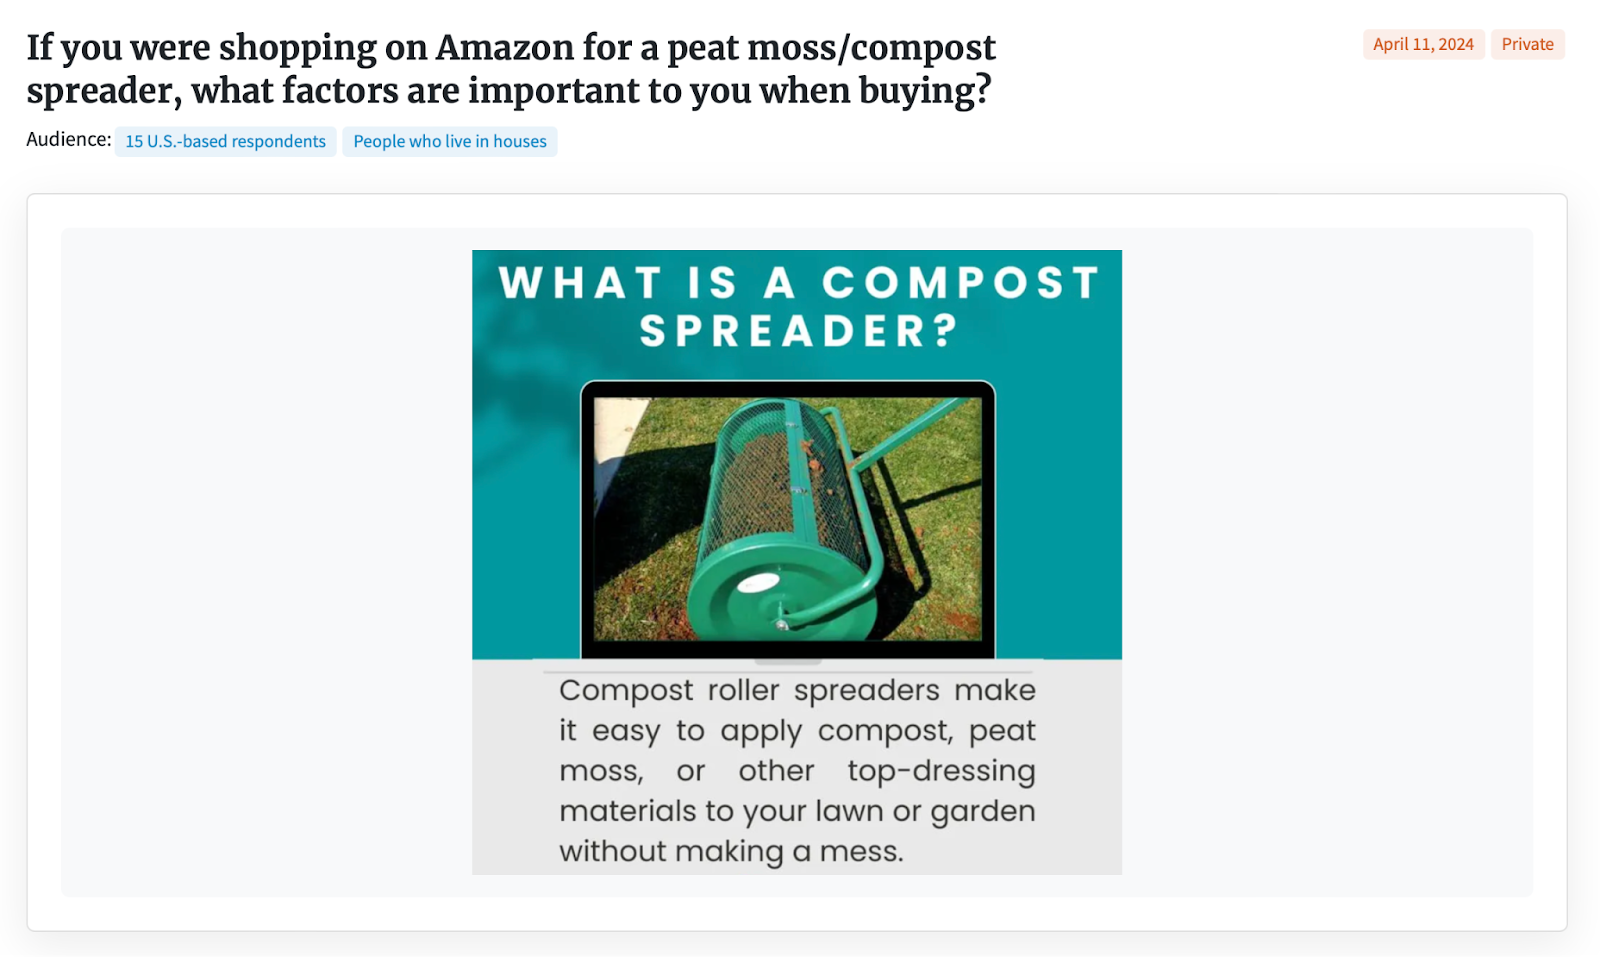 Screenshot of a PickFu survey question asking about shopping for a peat moss/compost spreader on Amazon